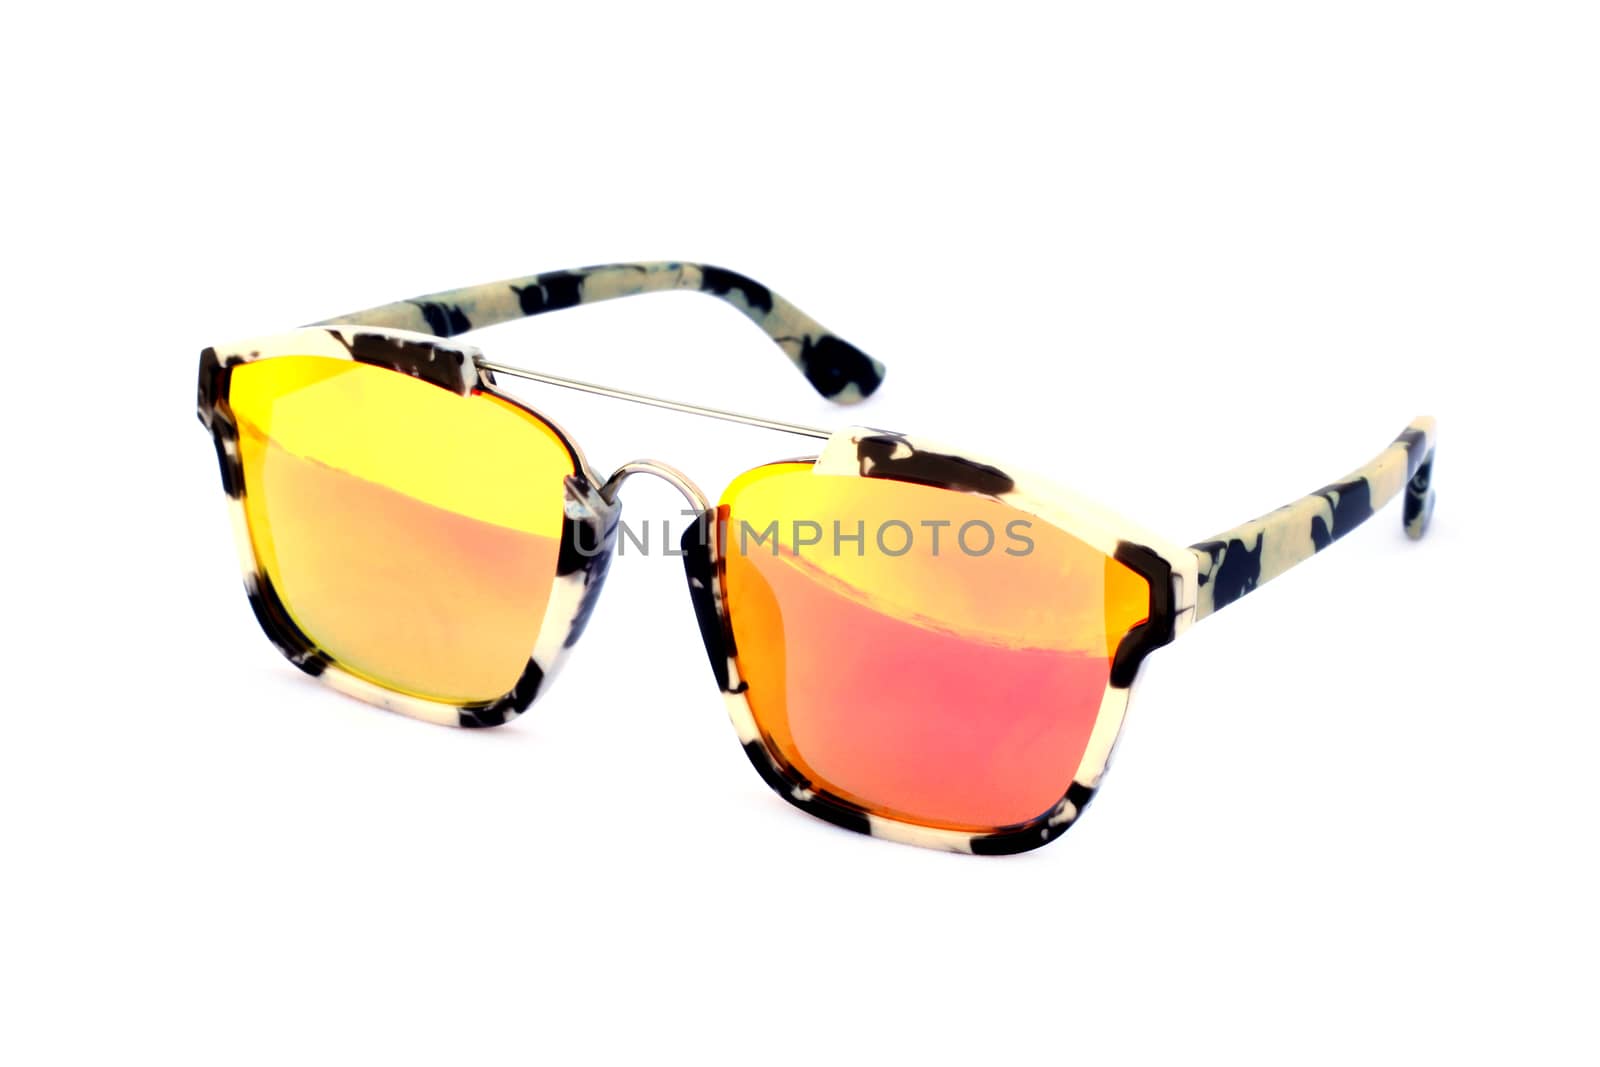 Image of sunglasses on a white background by yod67